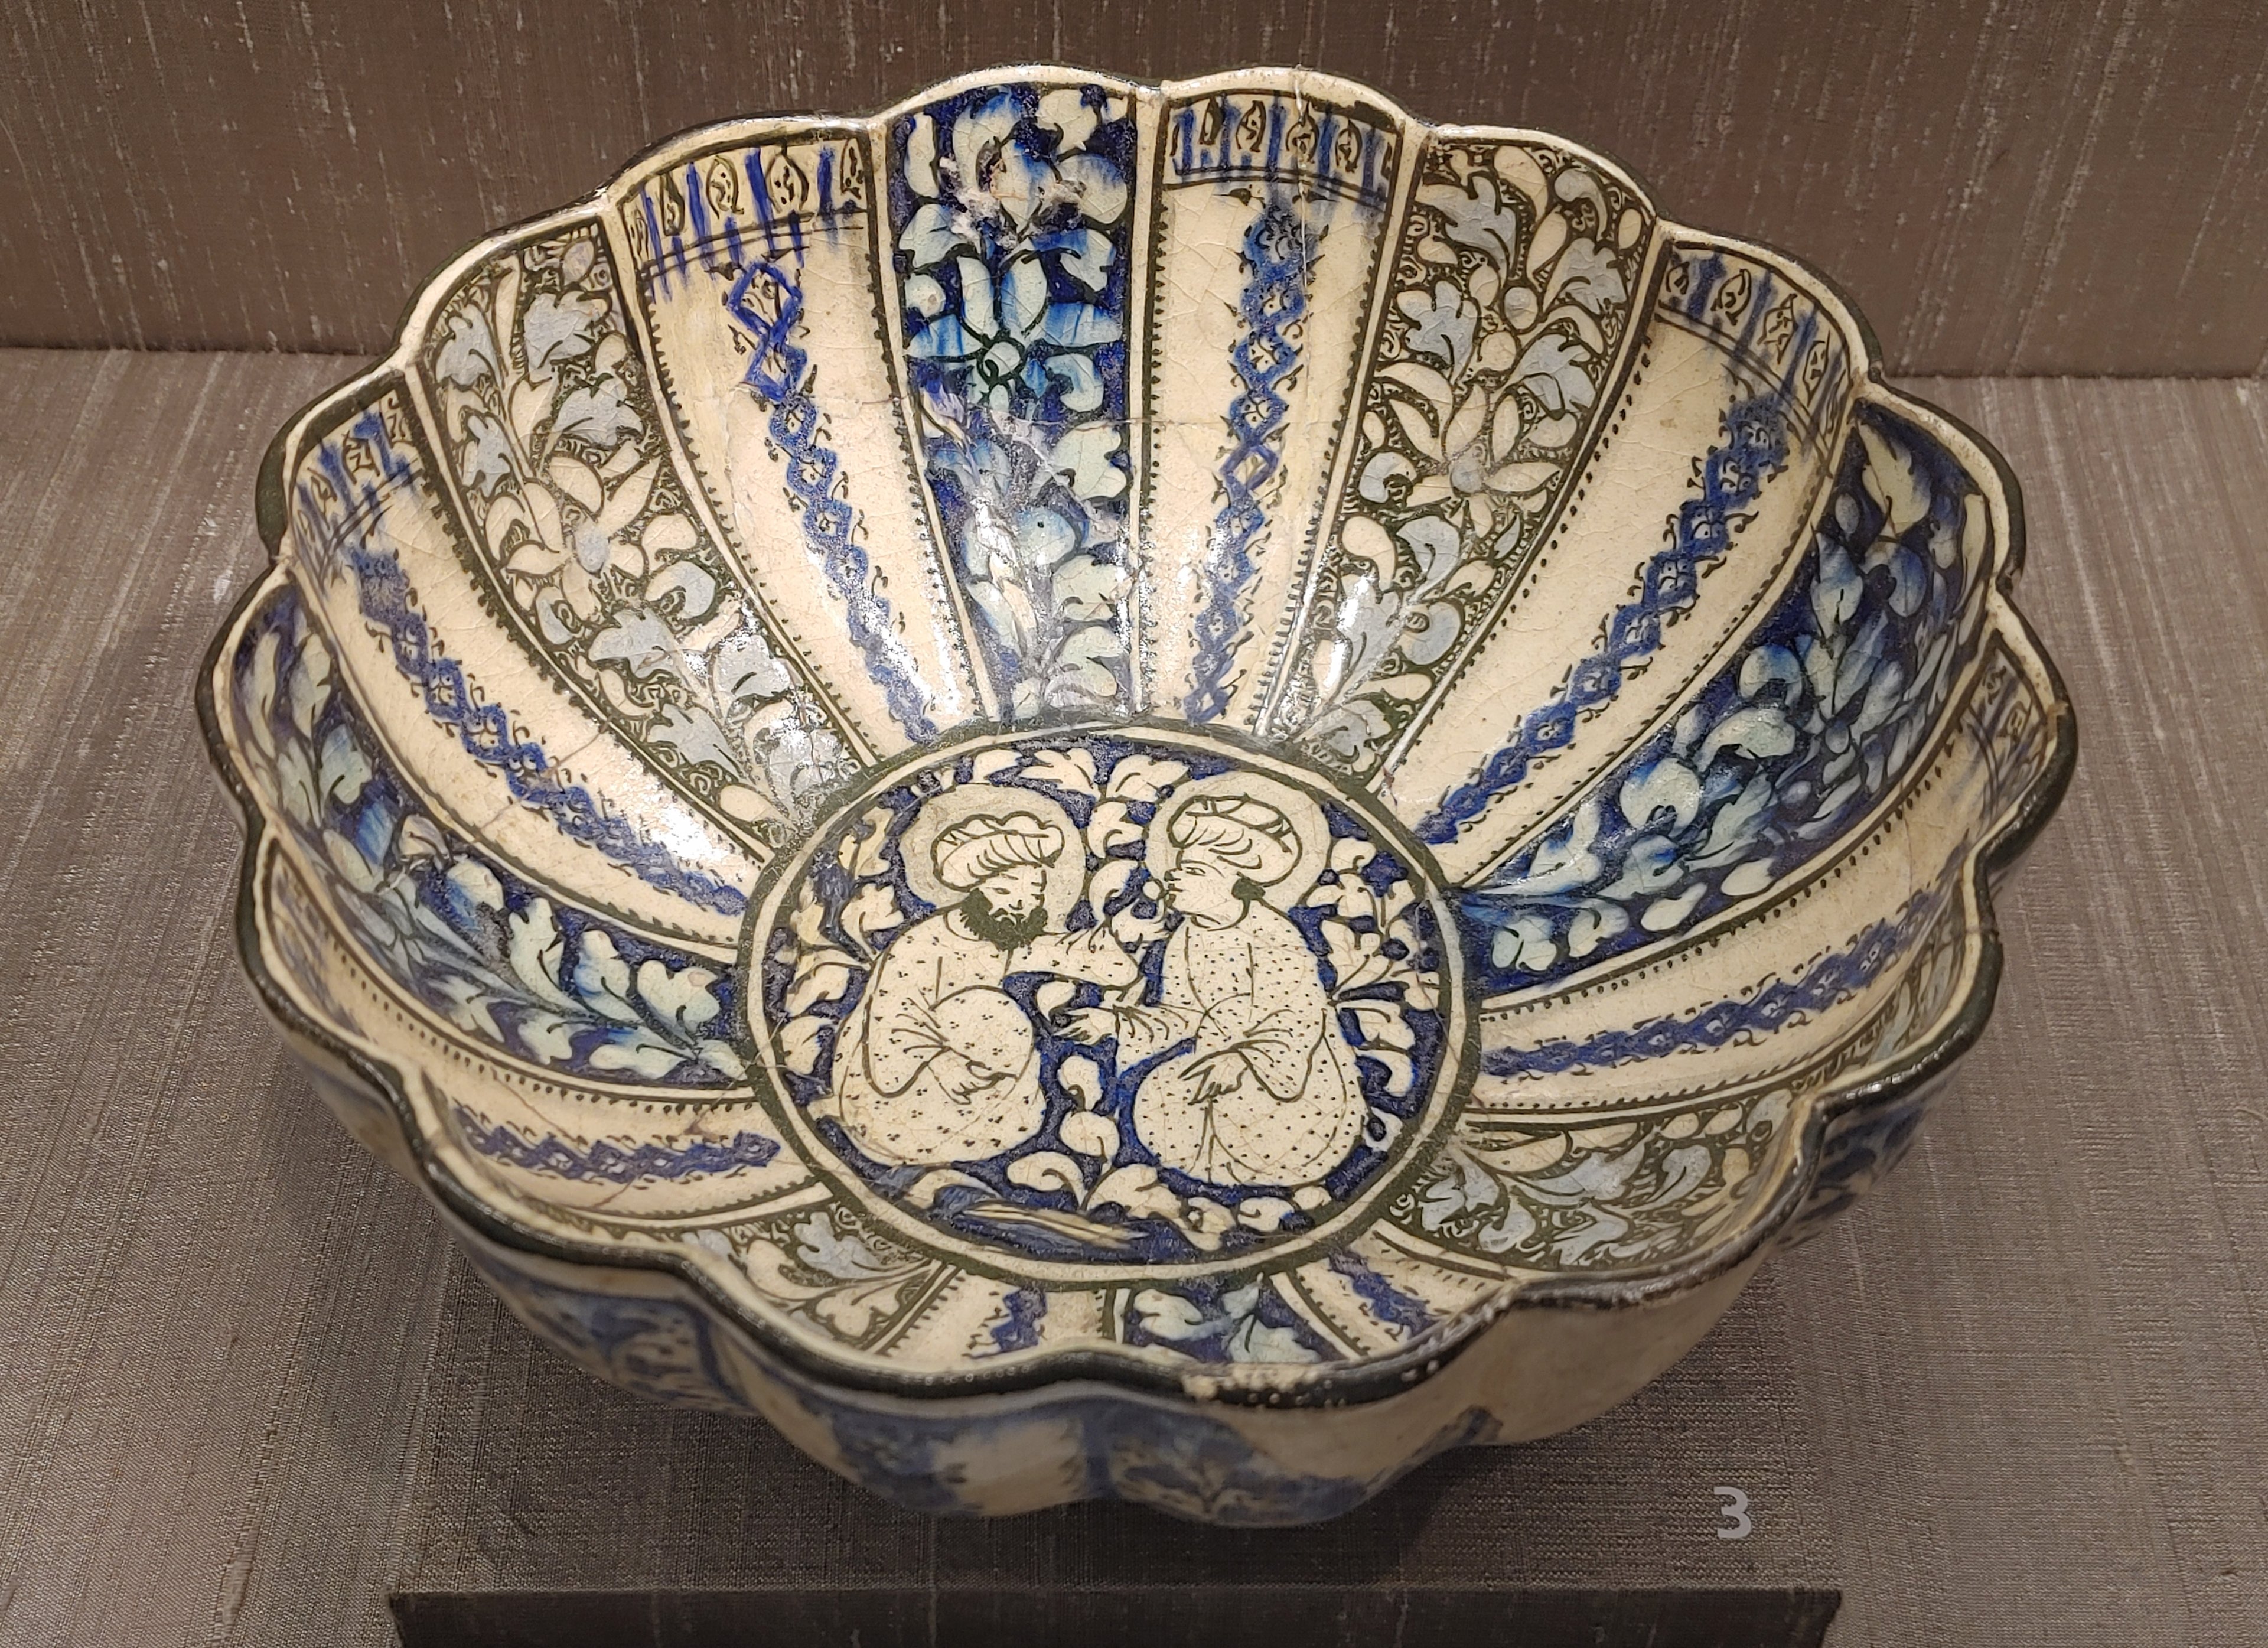 Mongol glazed bowl from the 1300s